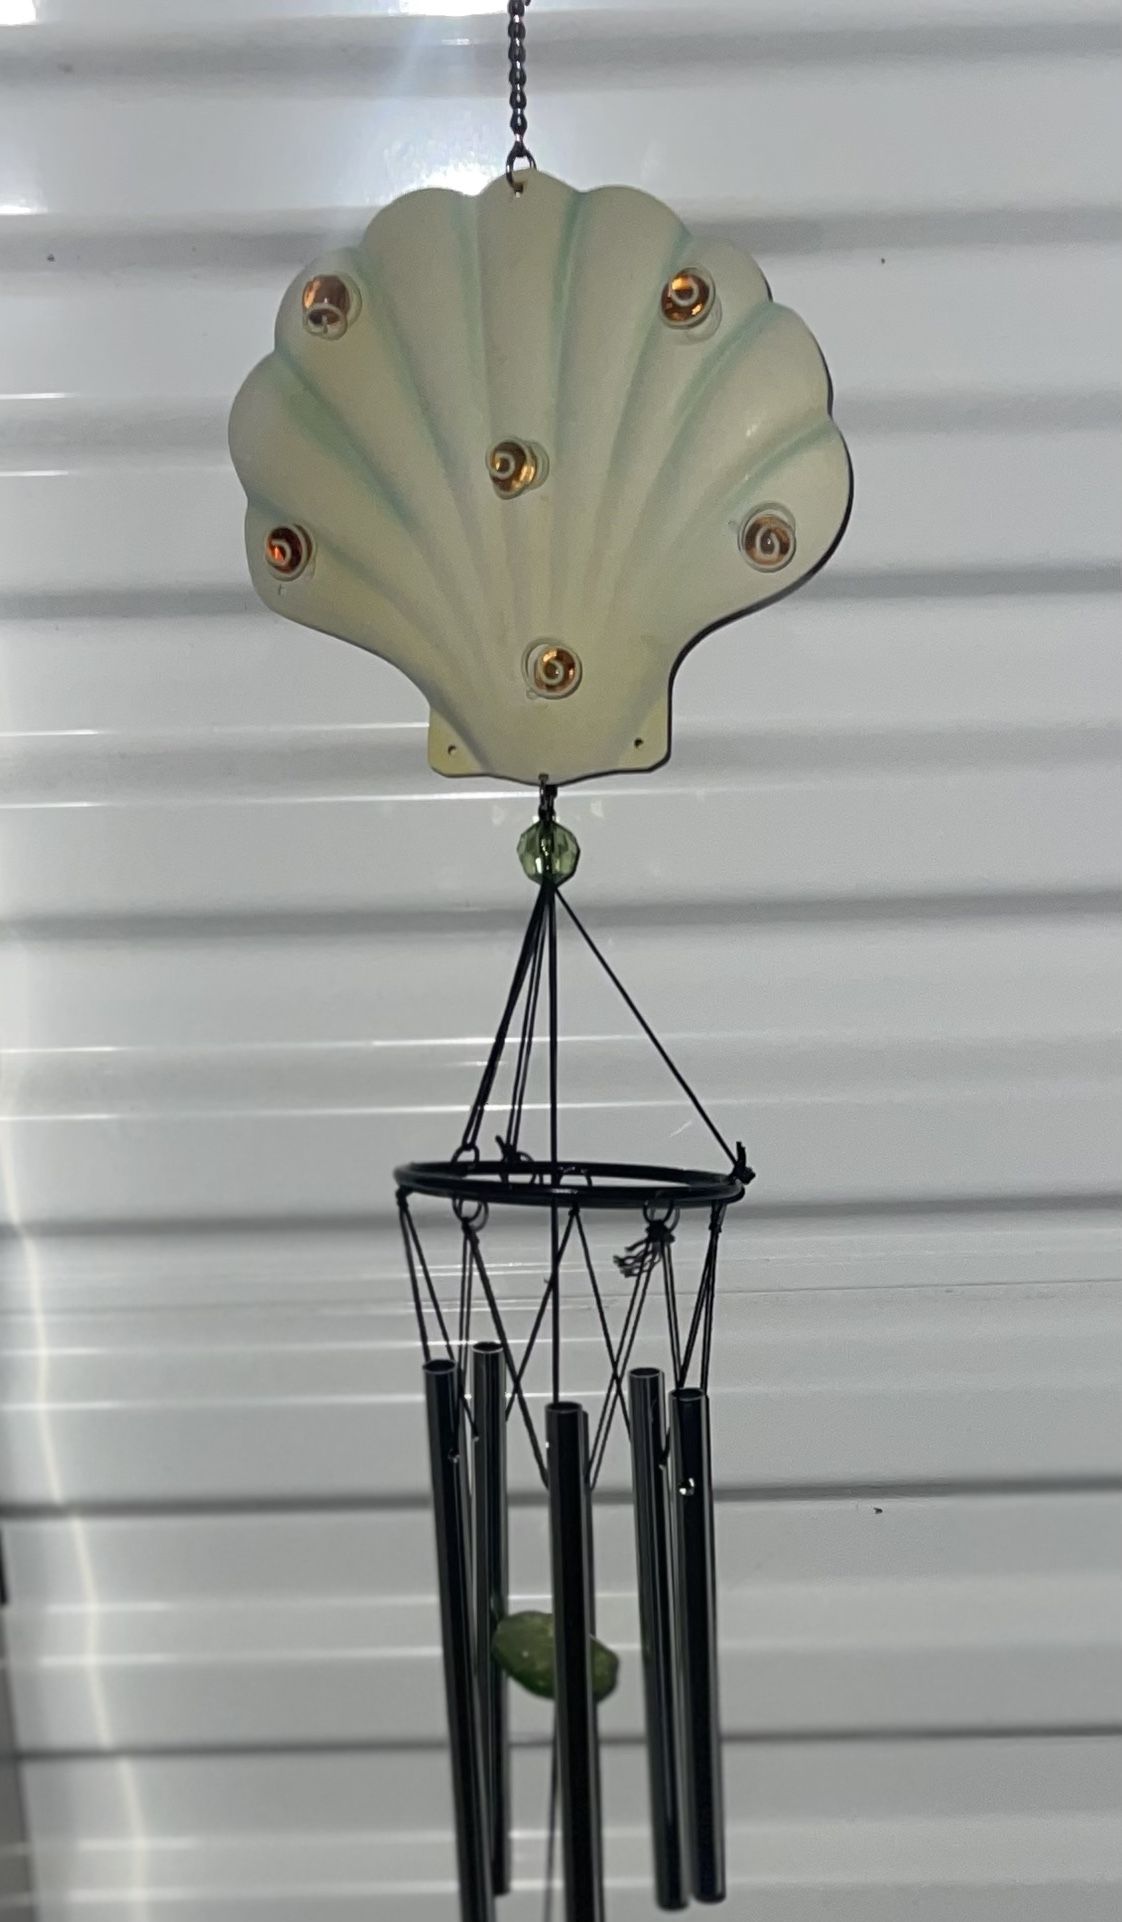 Clam Shell Wind Chimes 